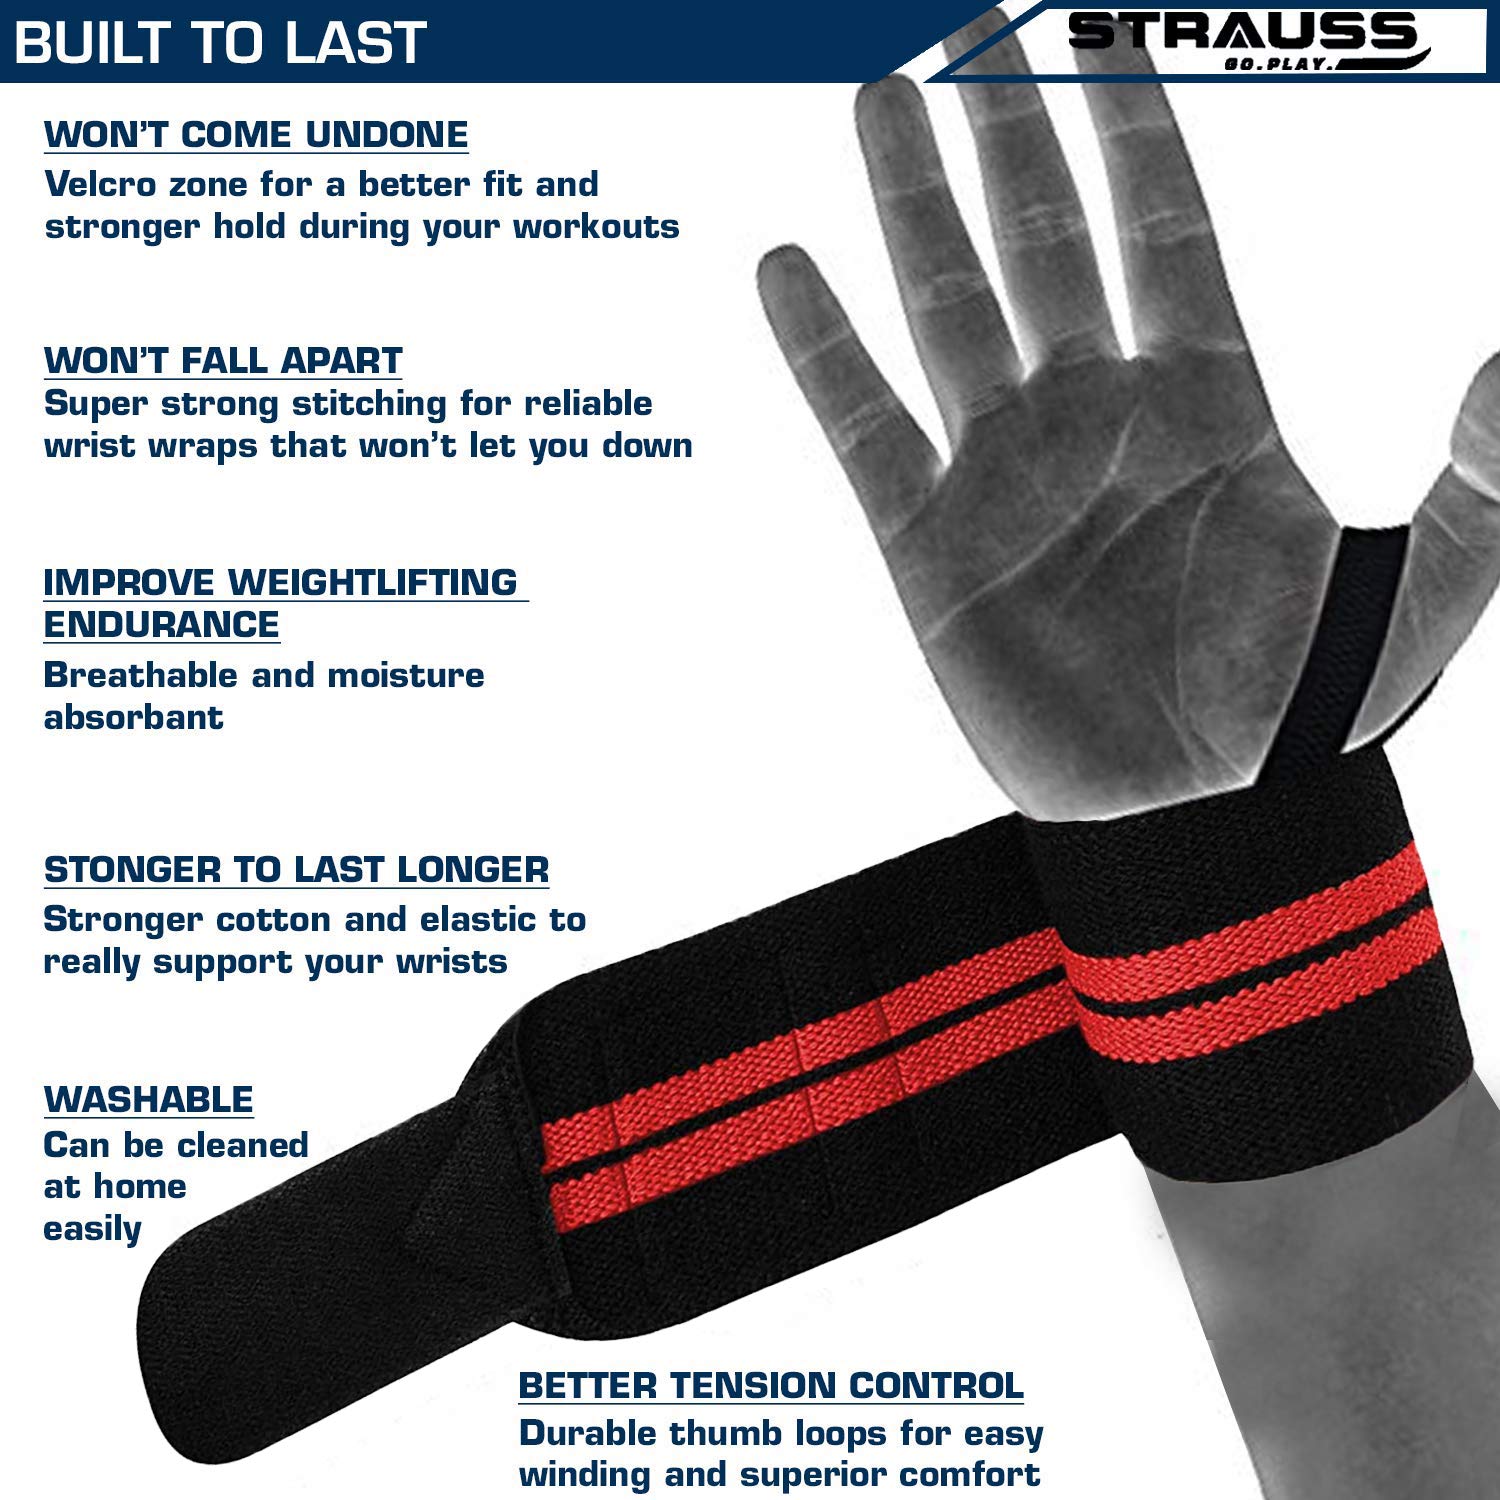 STRAUSS WL Cotton Wrist Supporter with Thumb Loop Straps & Closures for Gym, Workouts & Strength Training| Adjustable & Breathable with Powerful Velcro & Soft Material, (Black/red)